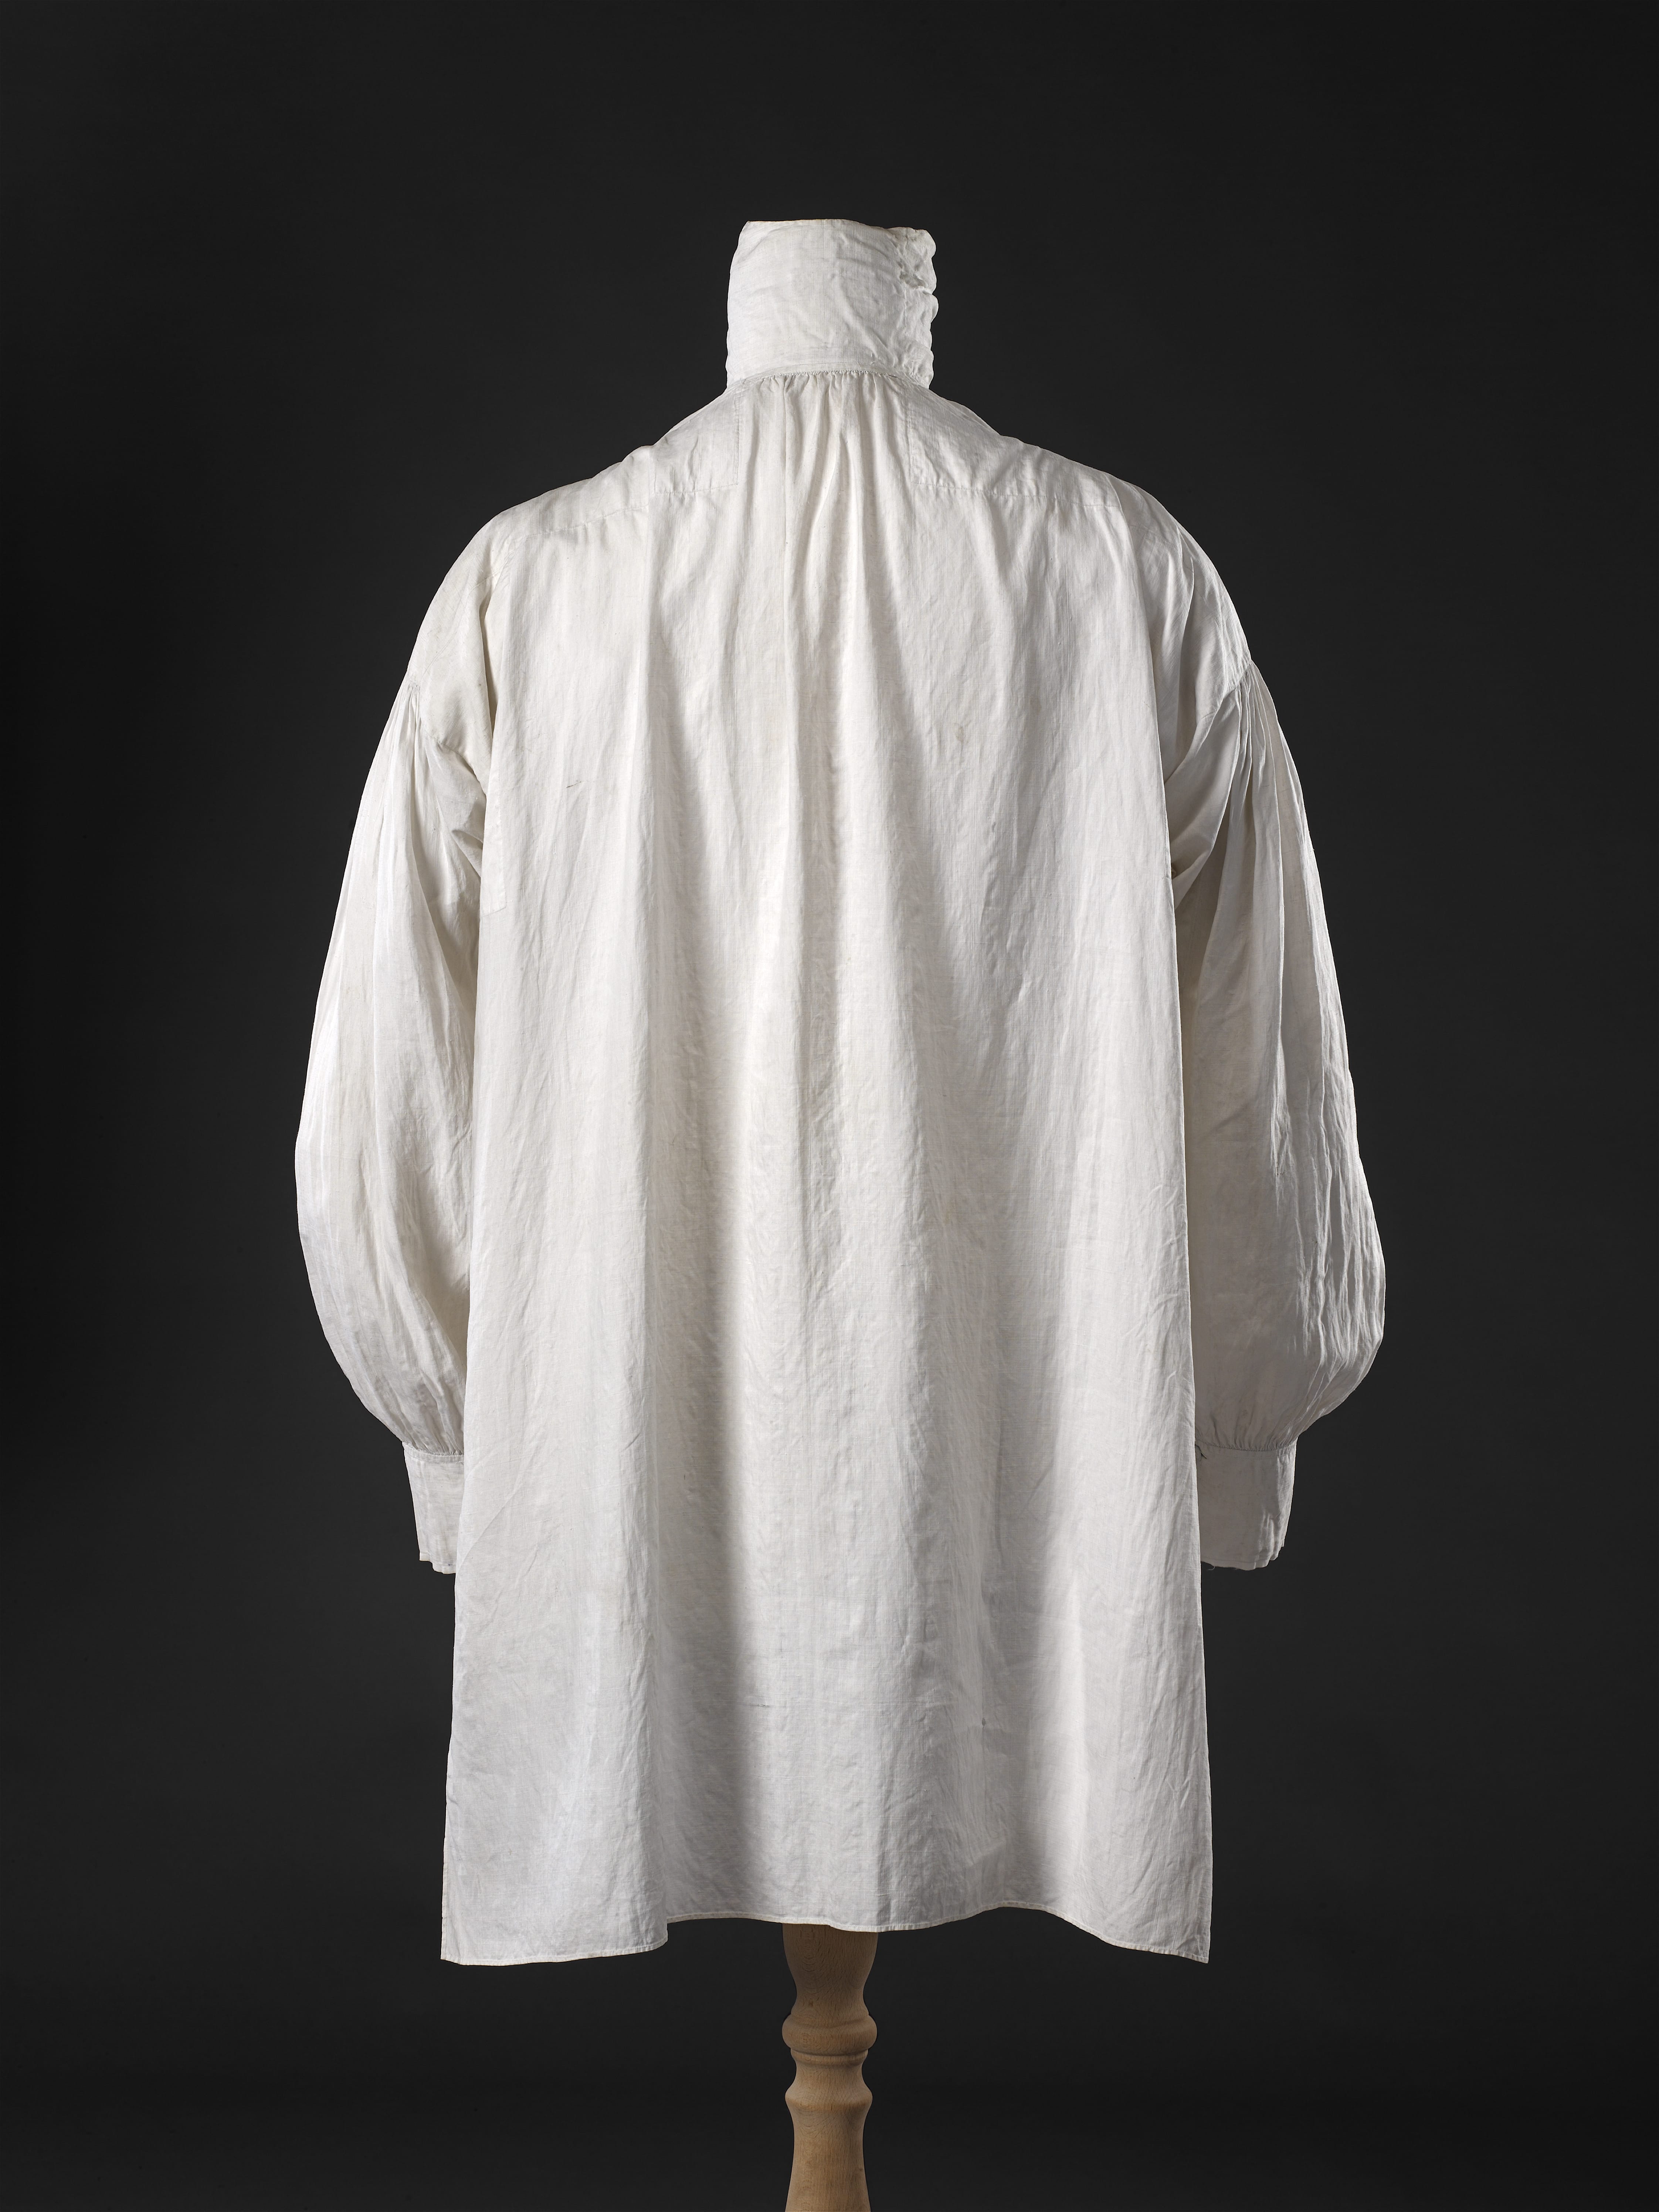 Shirt — The John Bright Collection